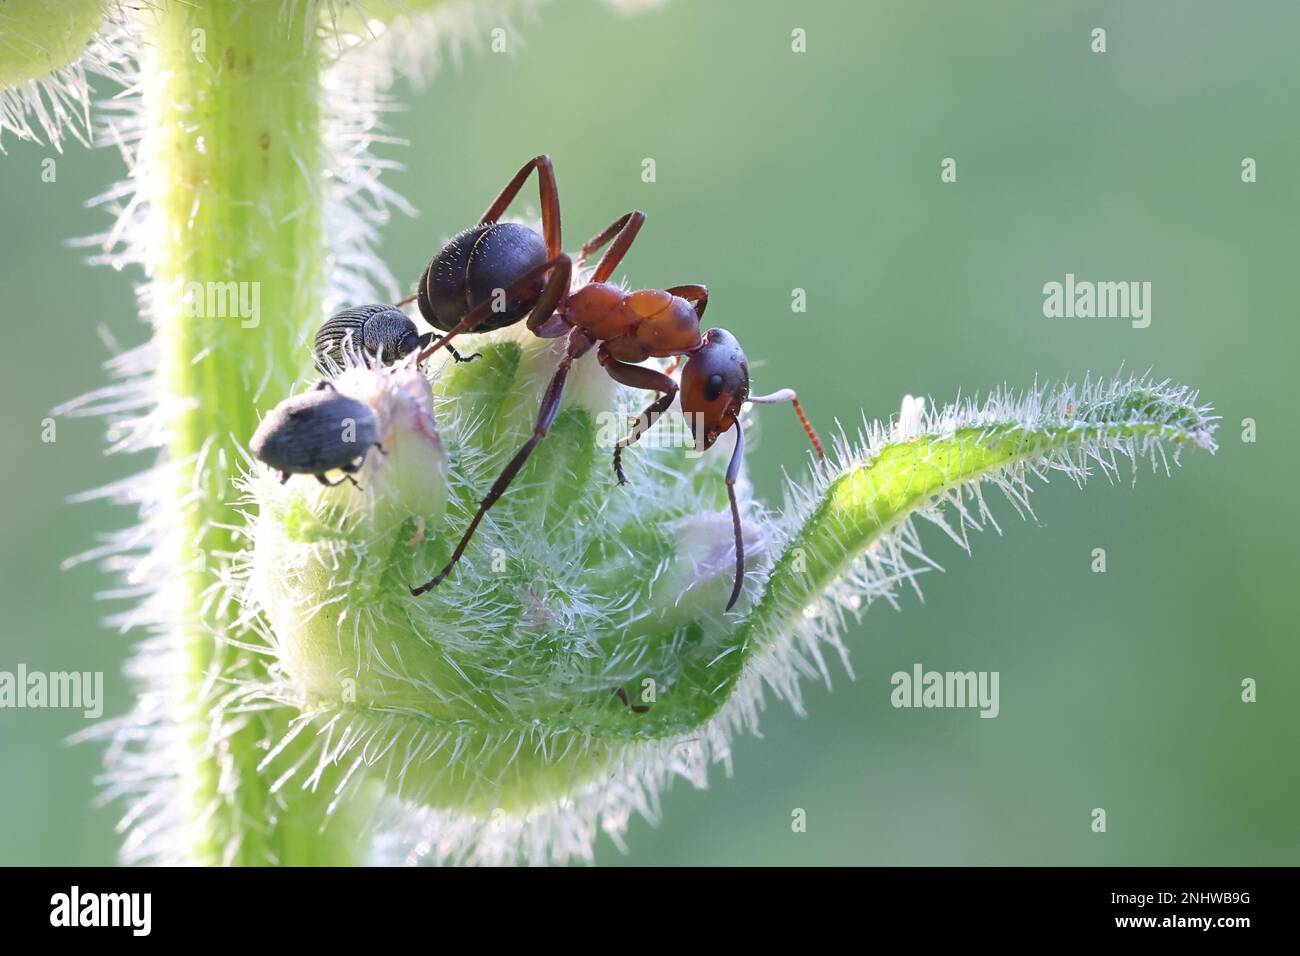 Wood ant and weevils on a flower bud of Bristly Bellflower, Campanula cervicaria Stock Photo